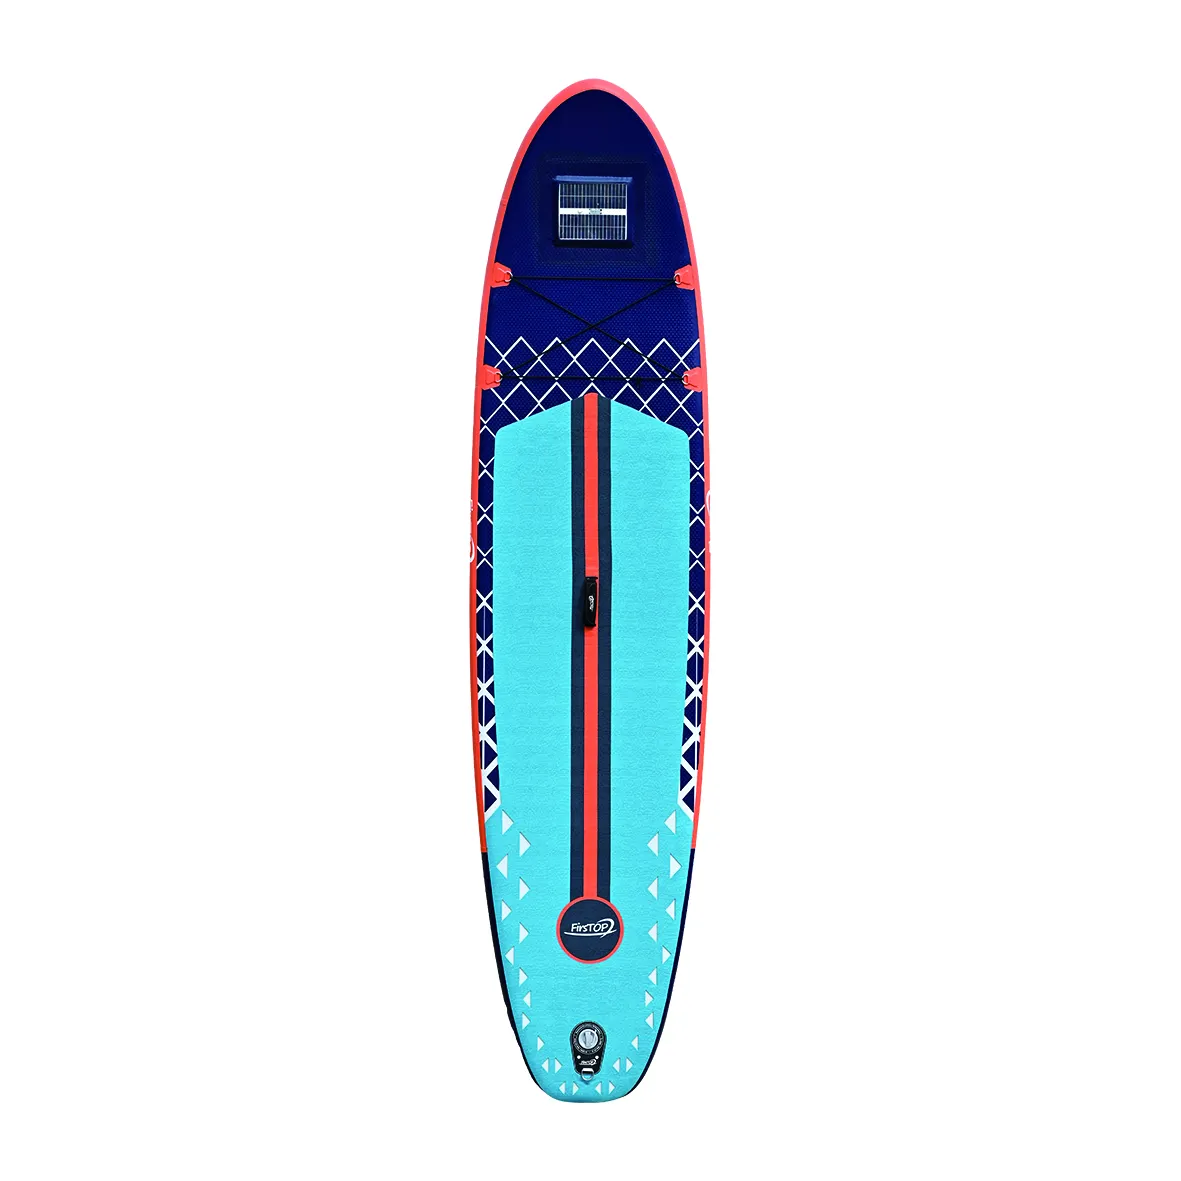 Nieuw Ontwerp Ce Surfen Sup Board Isup Paddle Board Opblaasbare Stand Up Paddle Board Met Led Licht